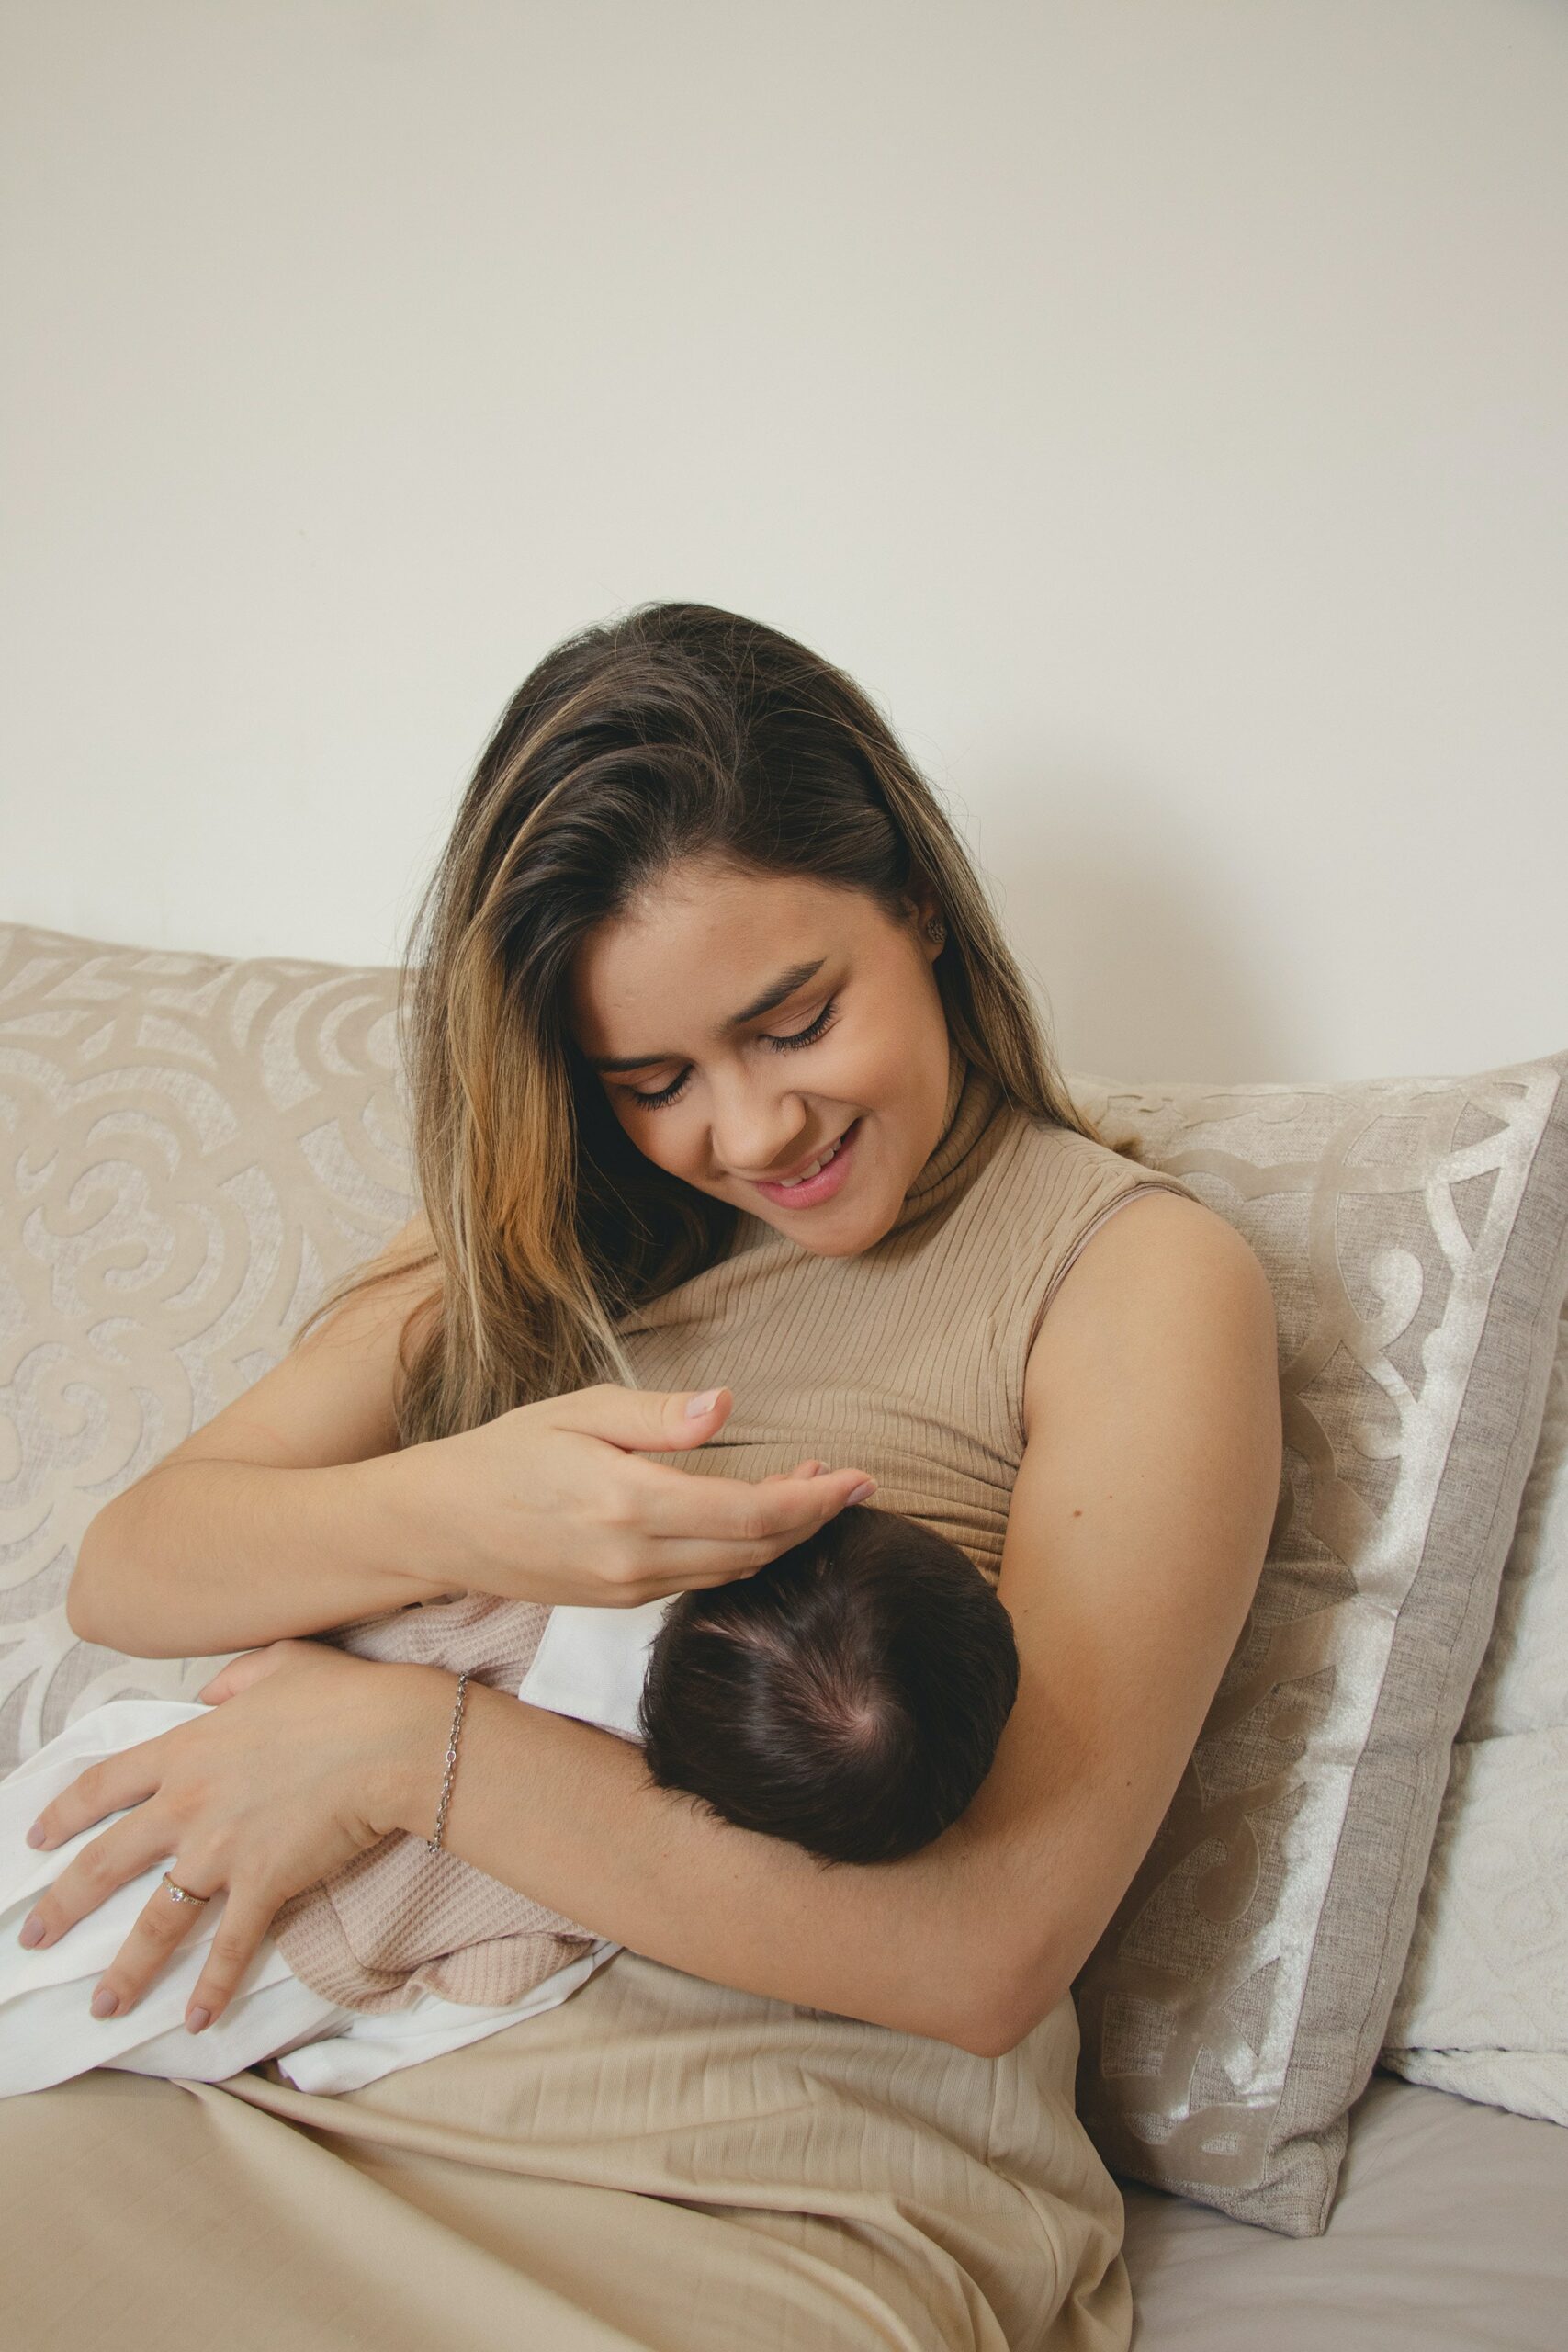 https://www.pexels.com/photo/a-mother-sitting-on-the-couch-while-breastfeeding-her-baby-14585081/